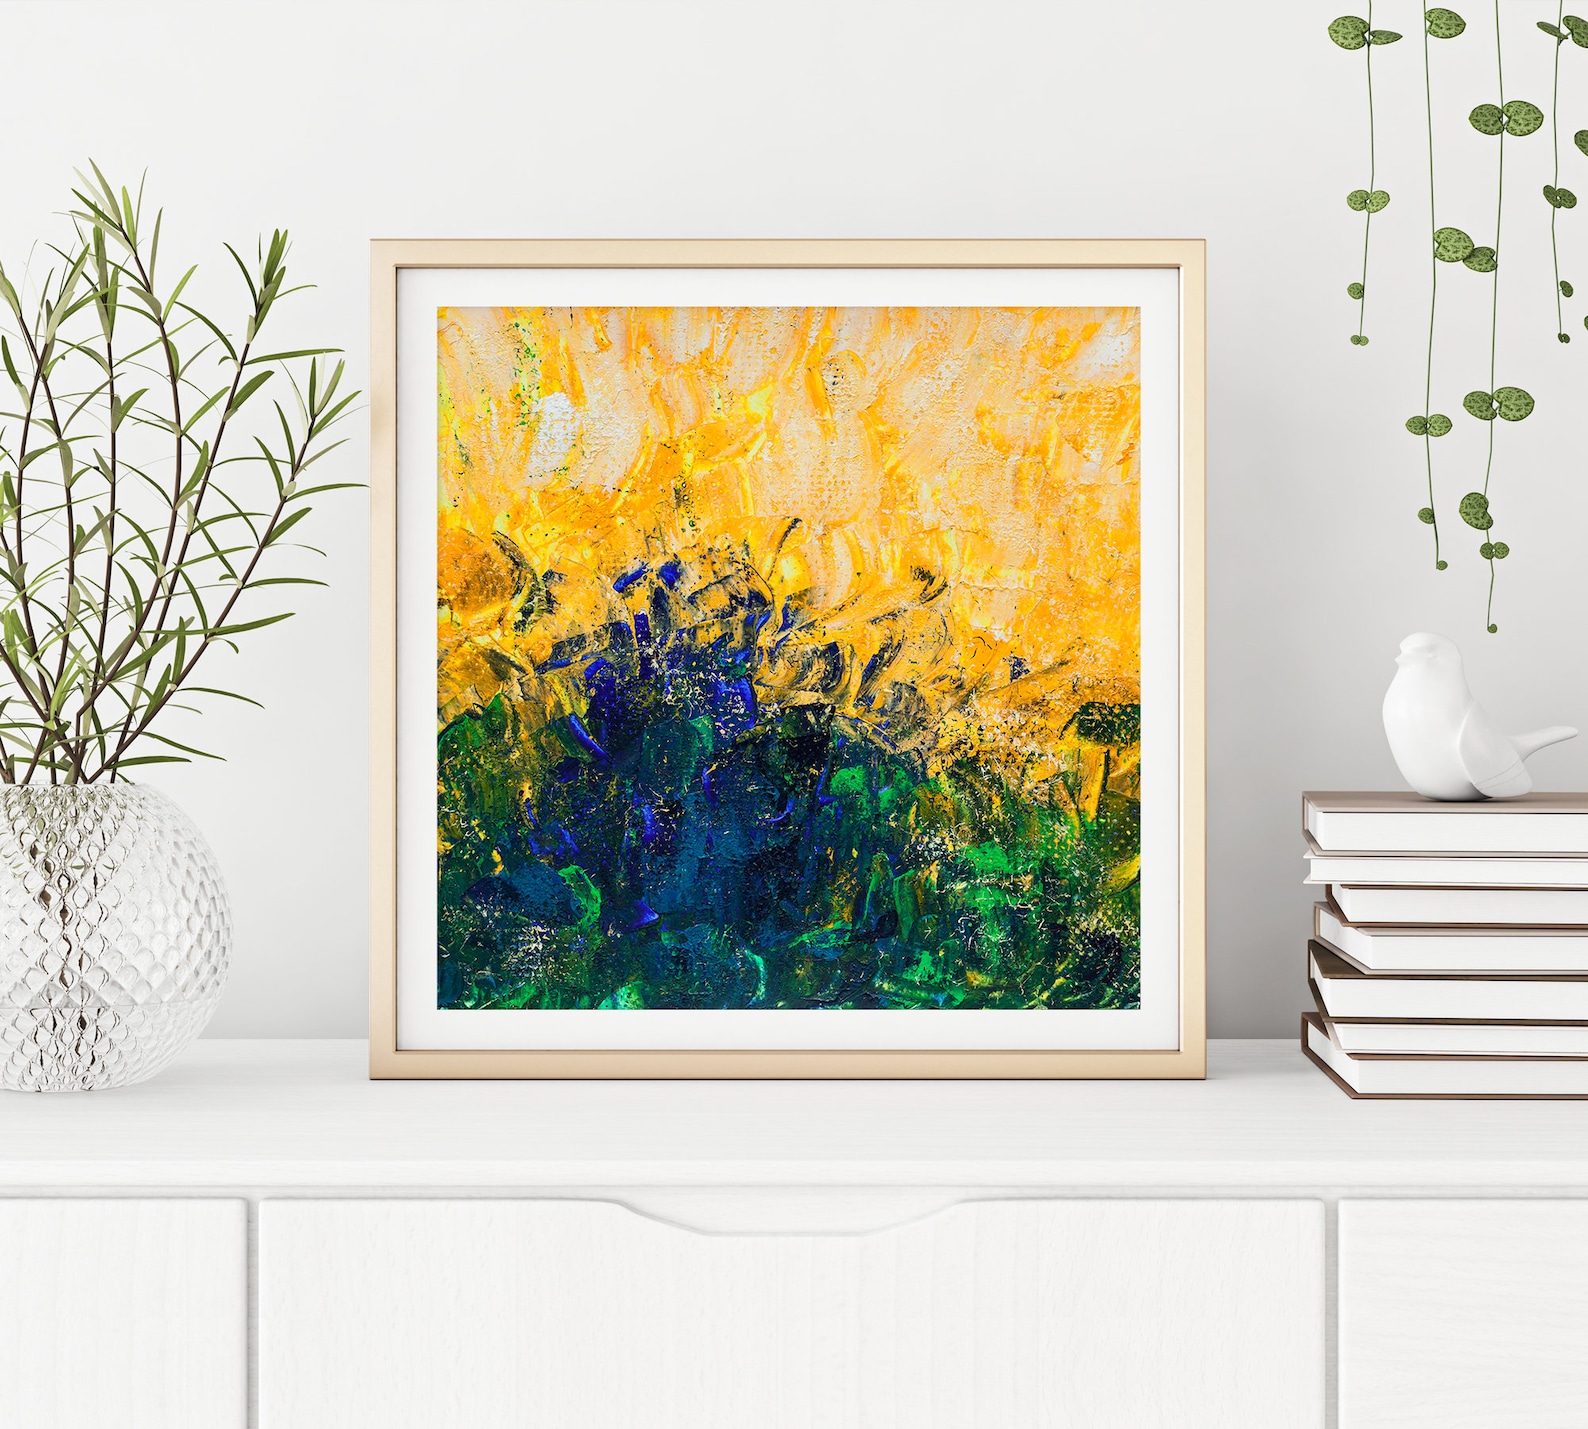 Abstract wall art prints of textured painting in blue yellow | Etsy